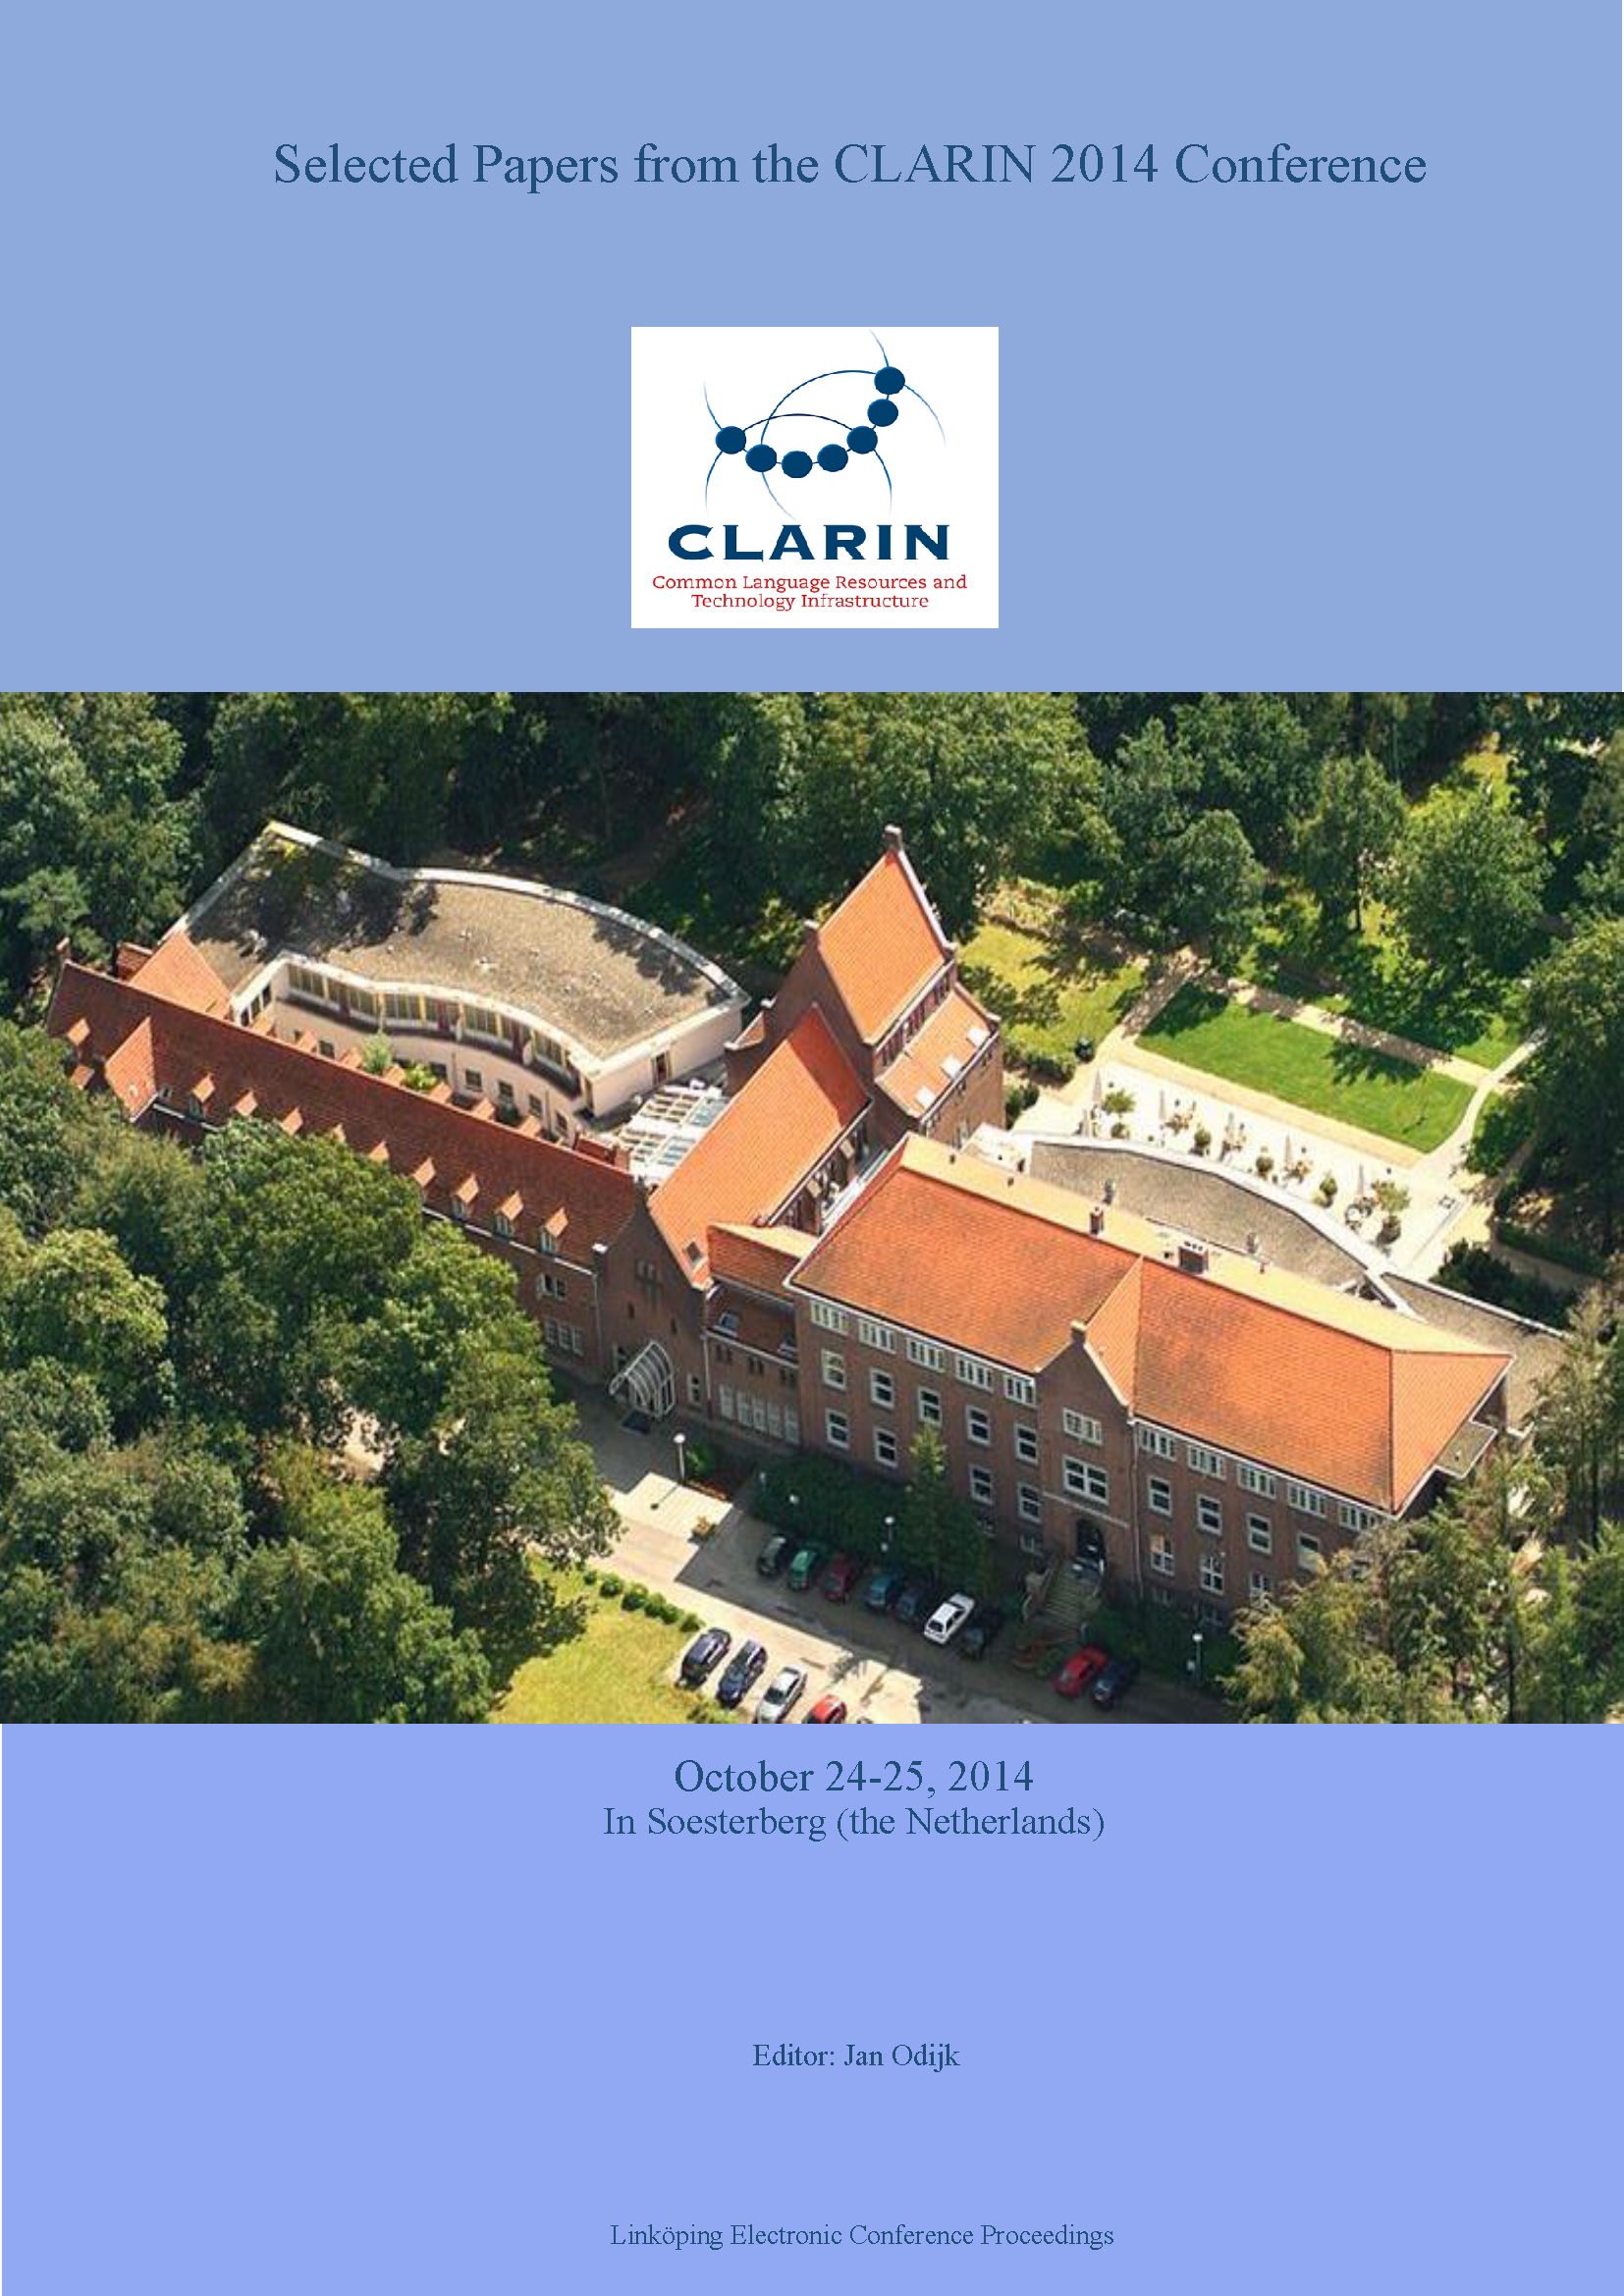 					View Selected Papers from the CLARIN 2014 Conference, October 24-25, 2014, Soesterberg, The Netherlands
				